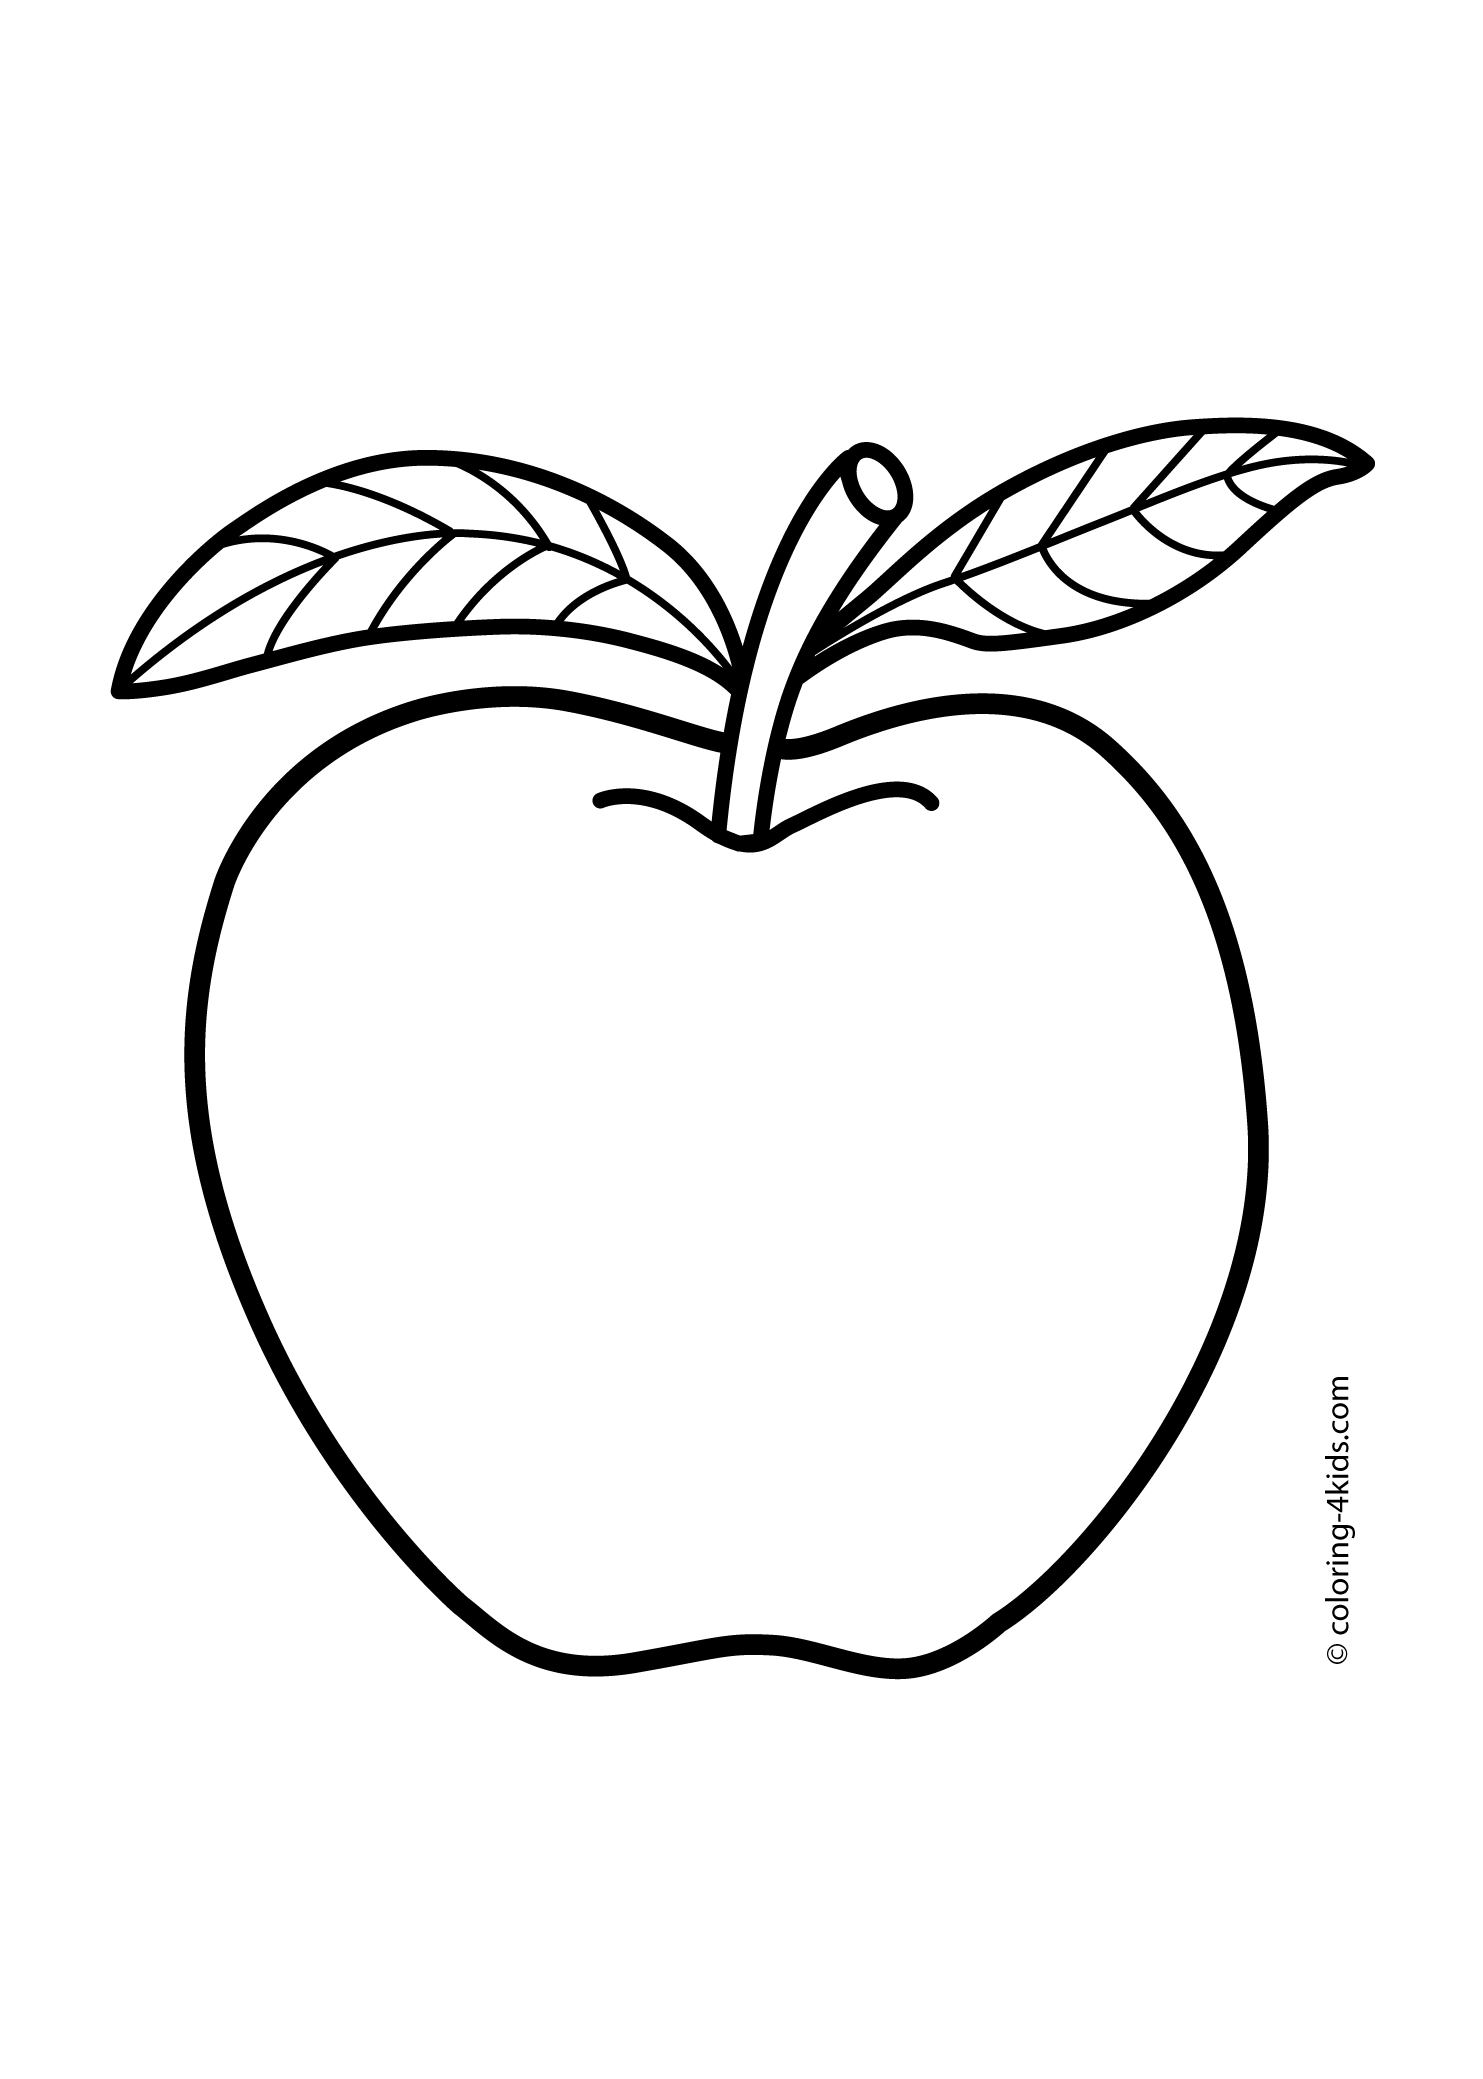 One Banana Fruits Coloring Pages | Coloring Pages | Pinterest ...